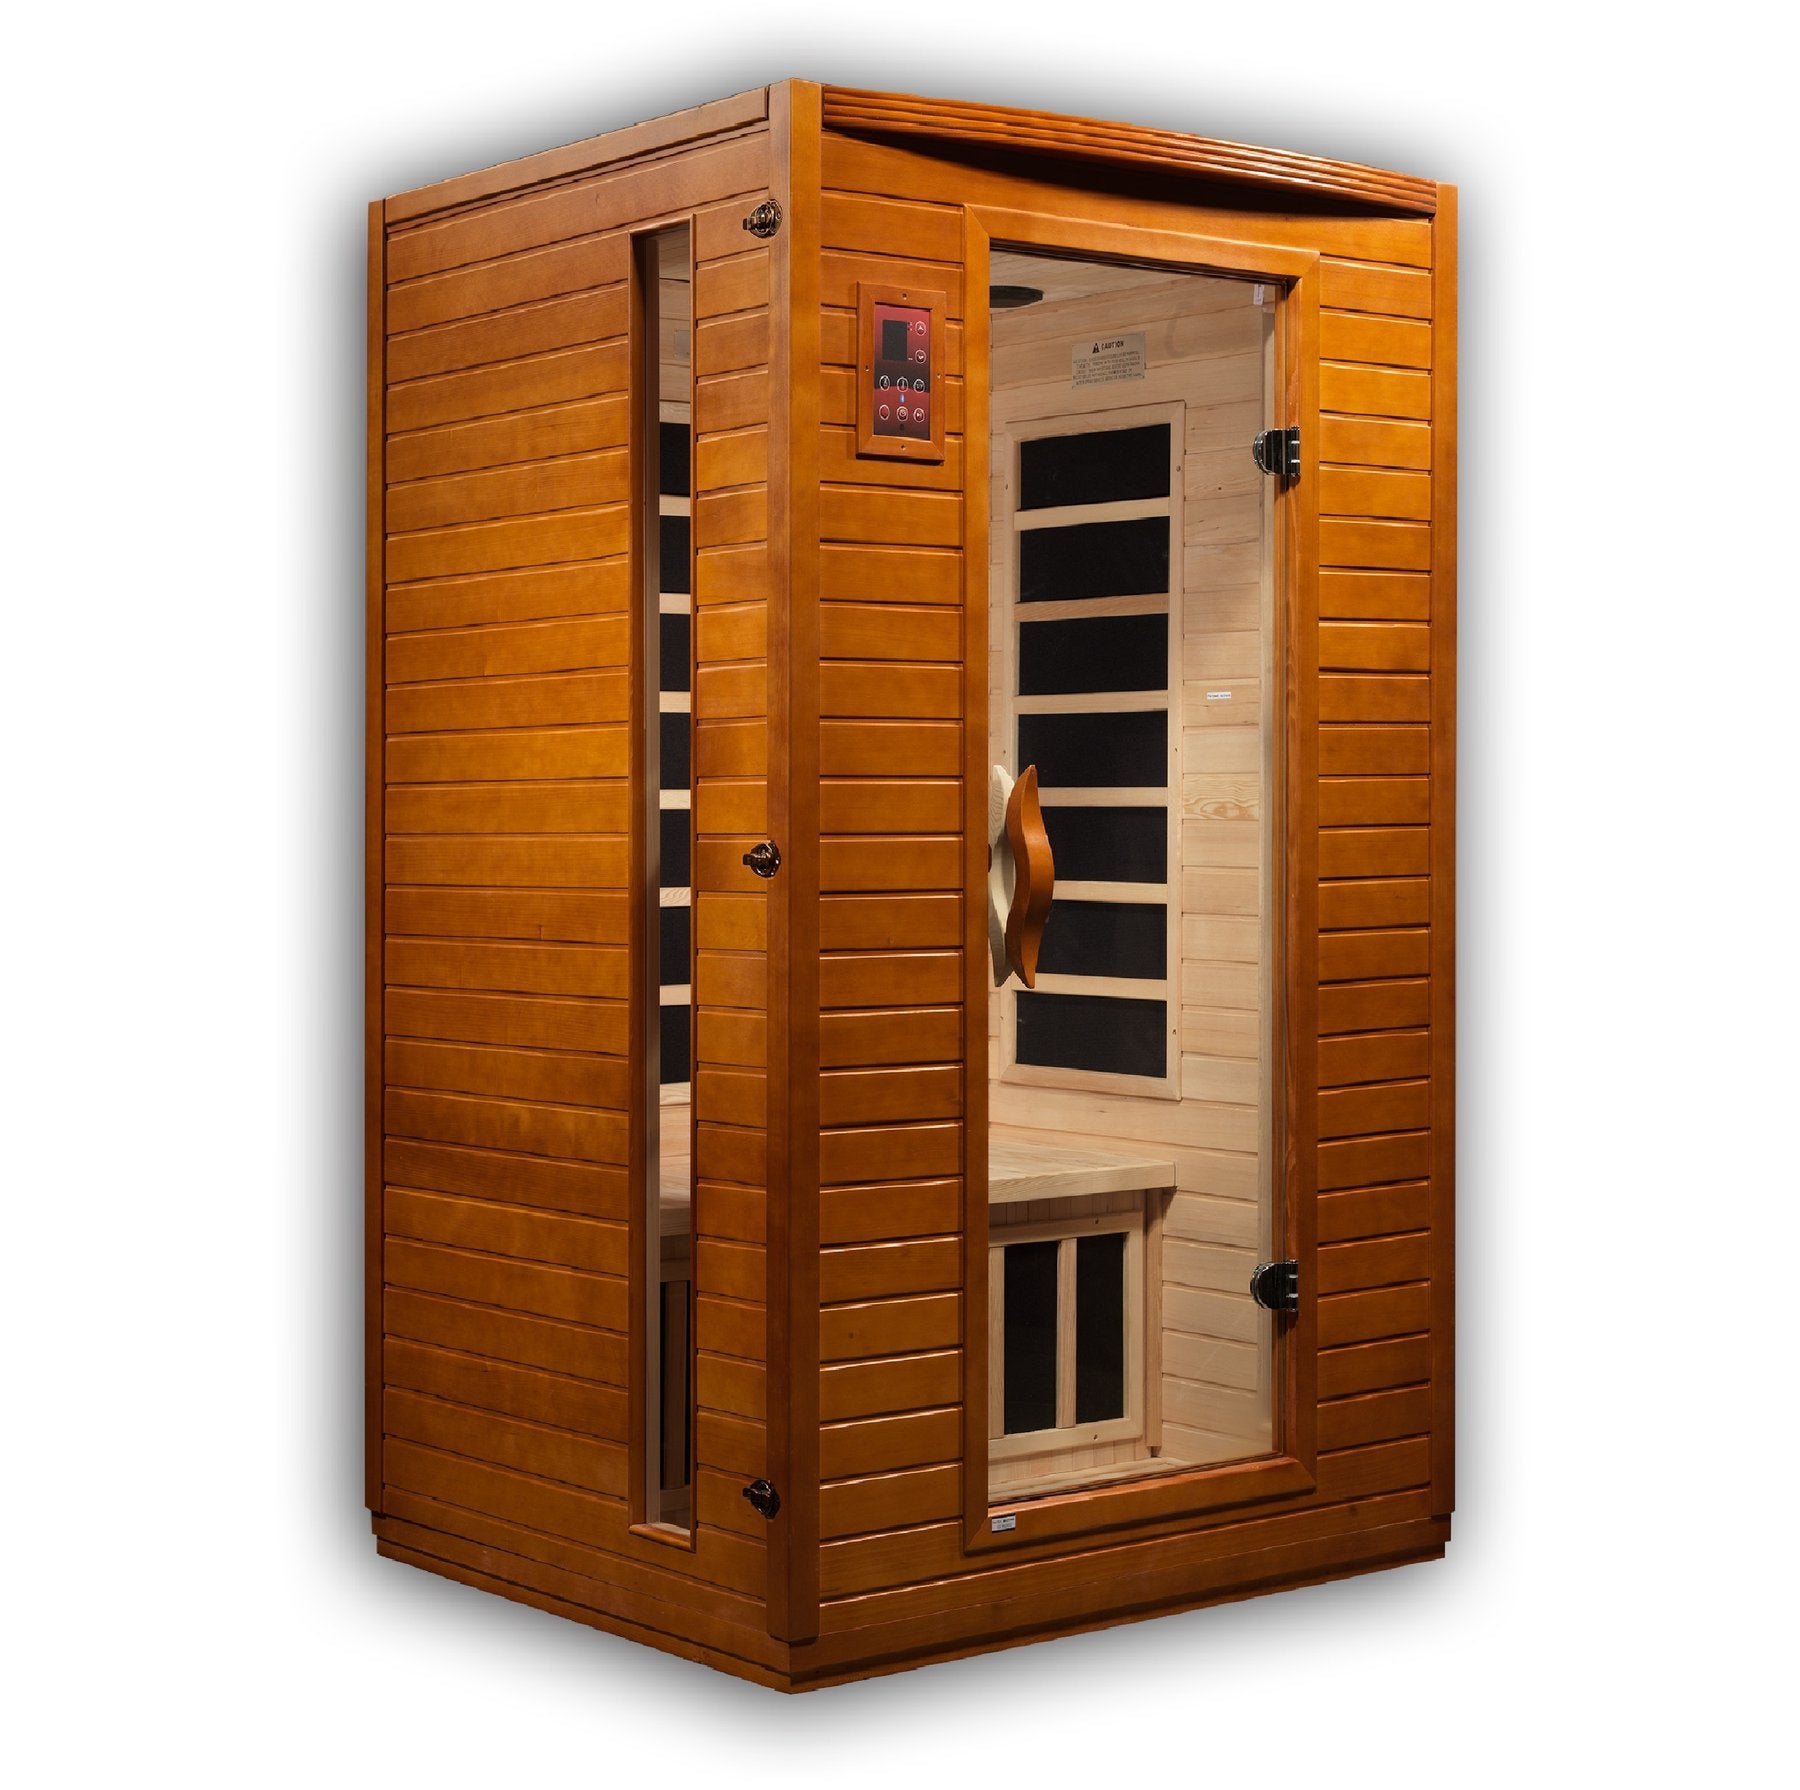 Versailles Edition 2 Person Dynamic Indoor Low EMF Far Infrared Sauna / promo code "Calmspas30" for $30 DISCOUNT / Ships in 2 days